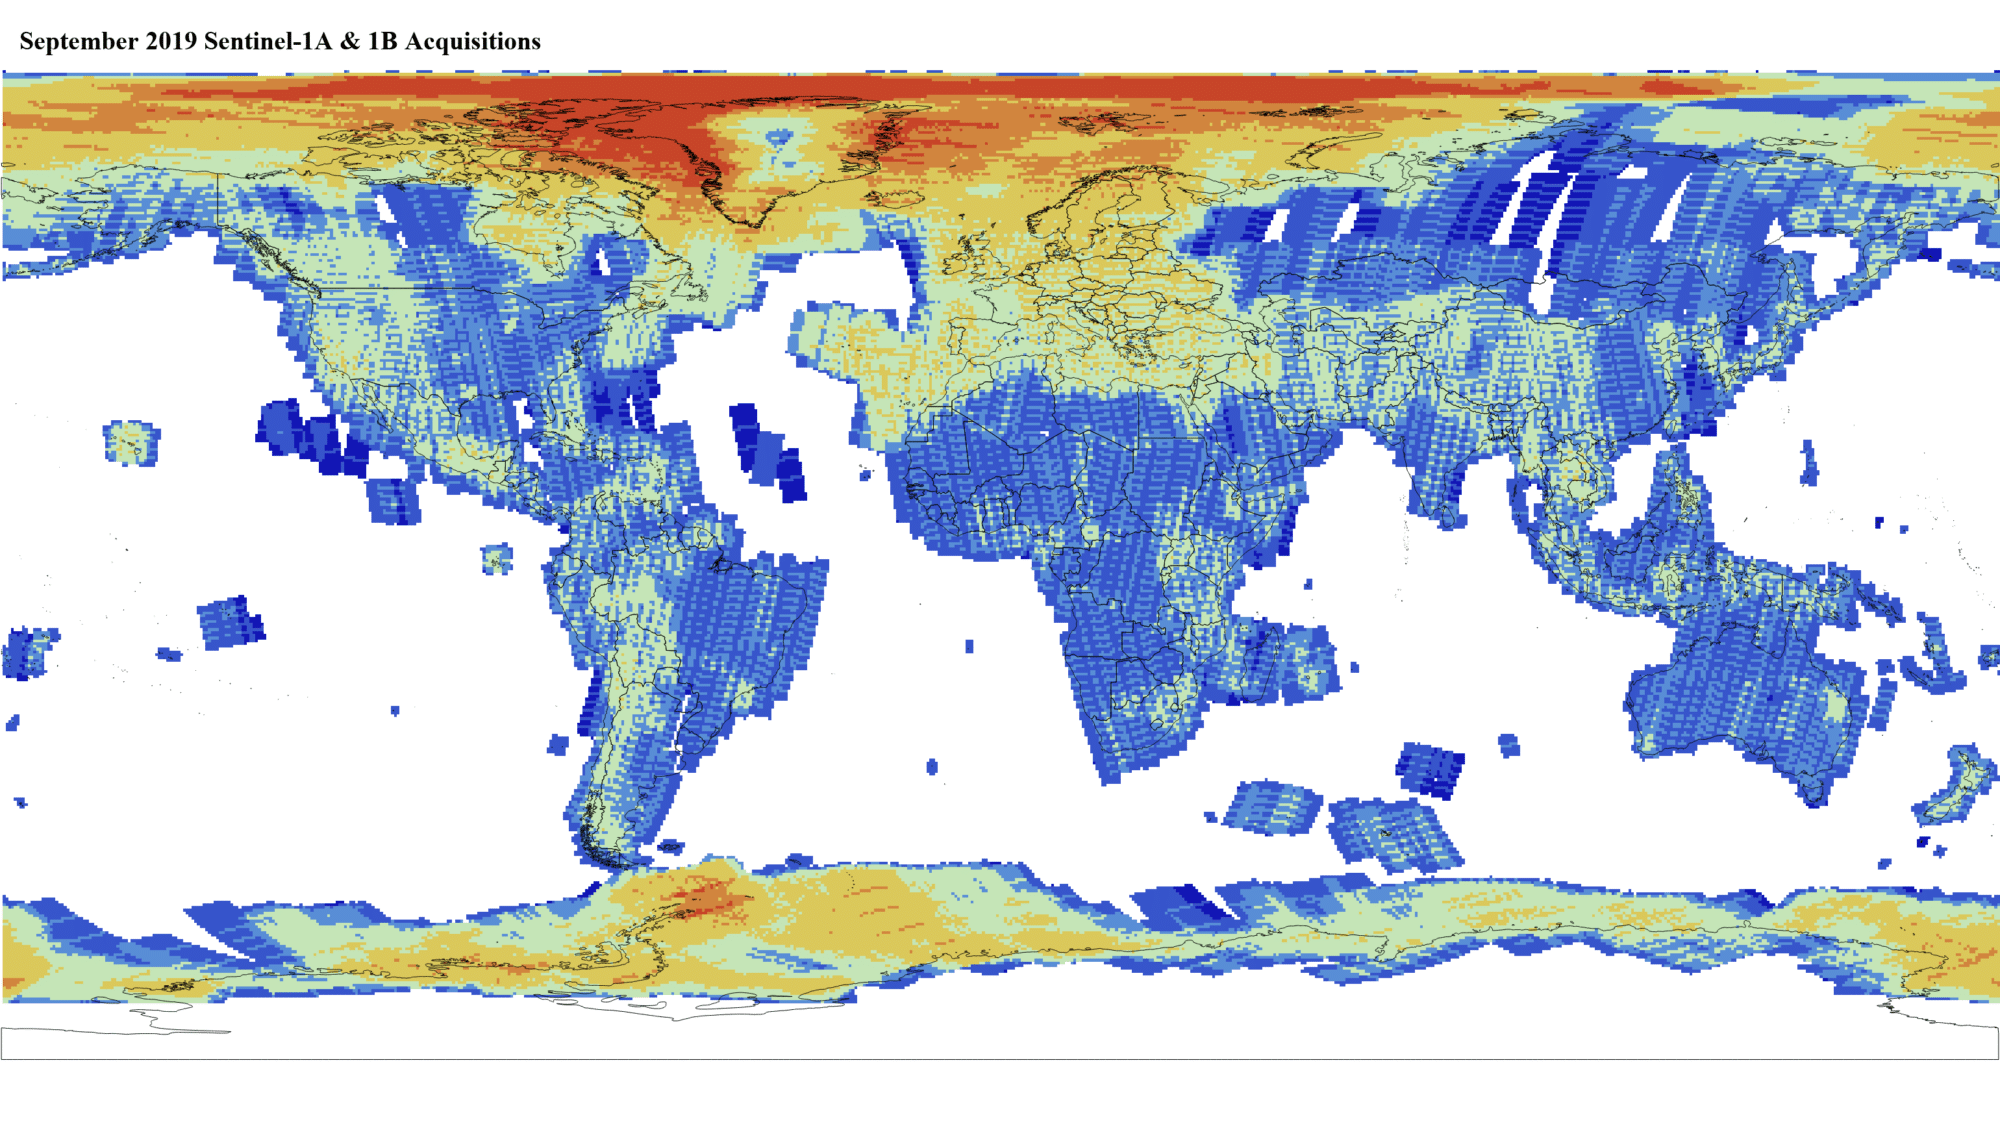 Heat map of Sentinel-1A and -1B GRD global acquisitions September 2019